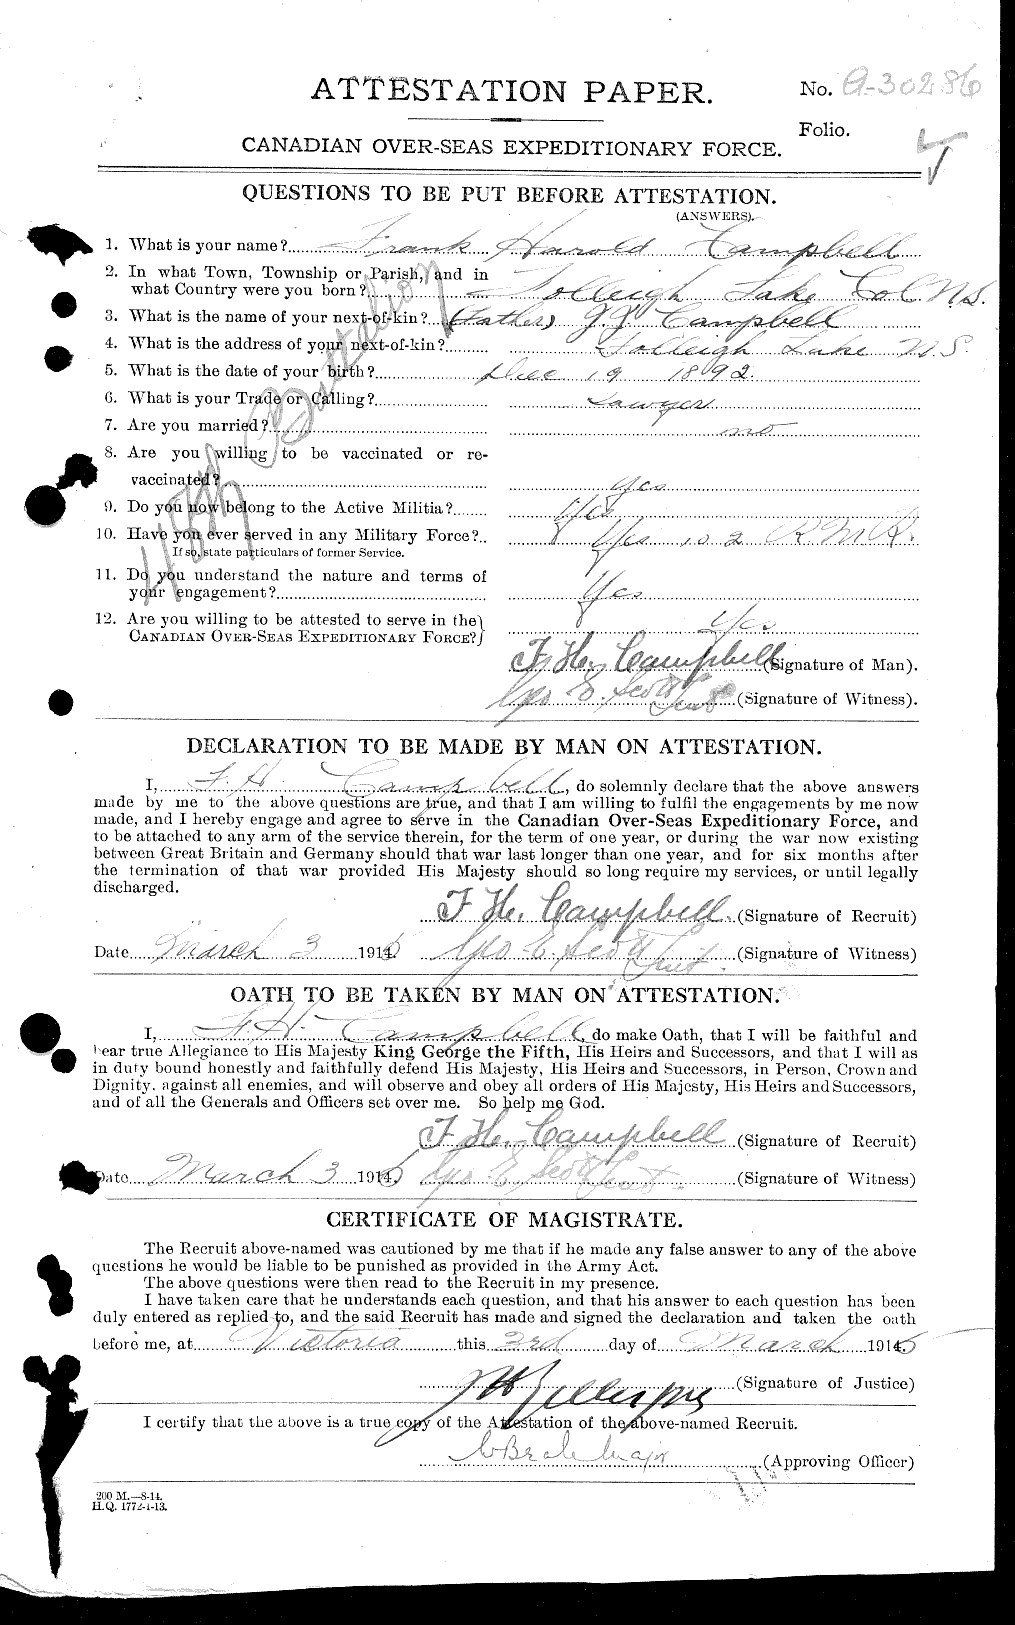 Personnel Records of the First World War - CEF 008283a